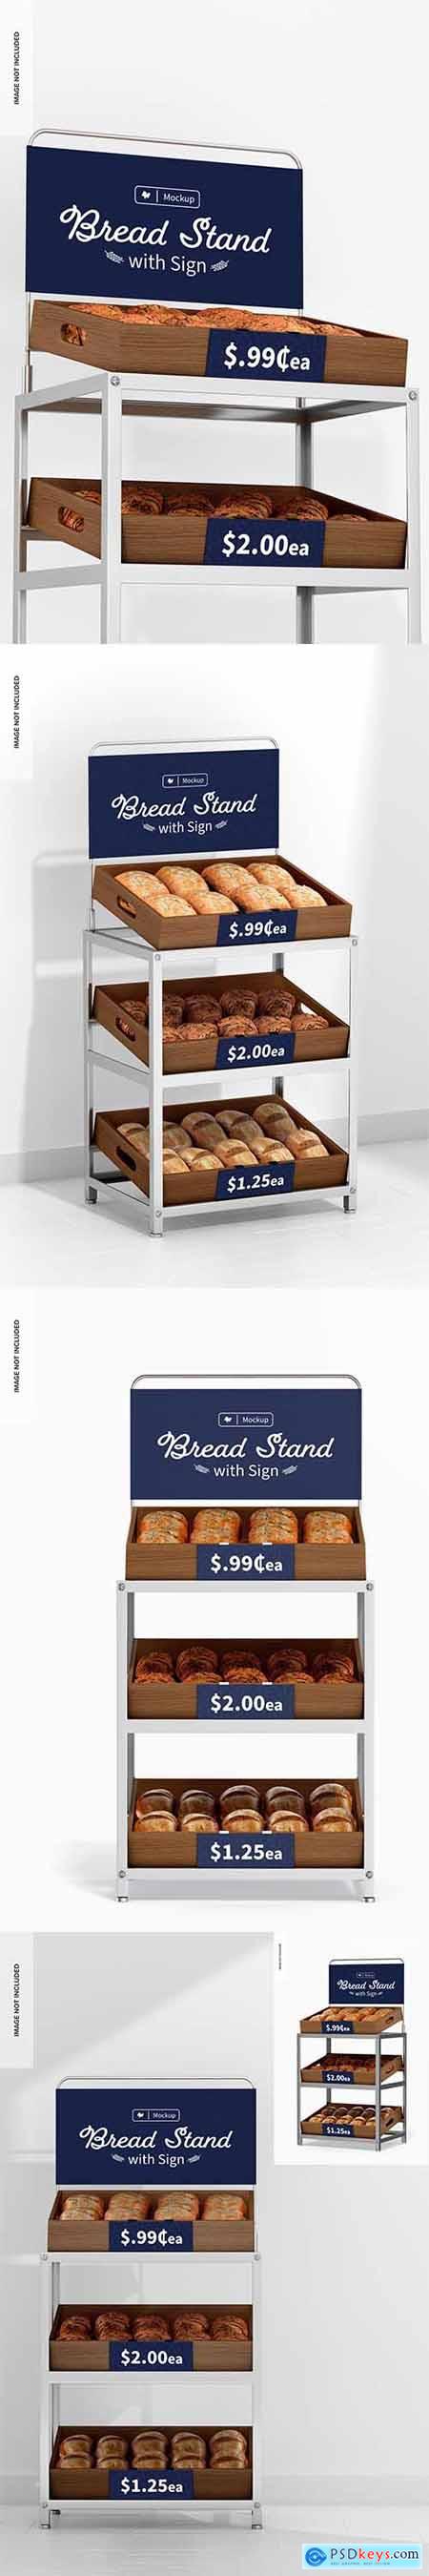 Bread stand with sign mockup